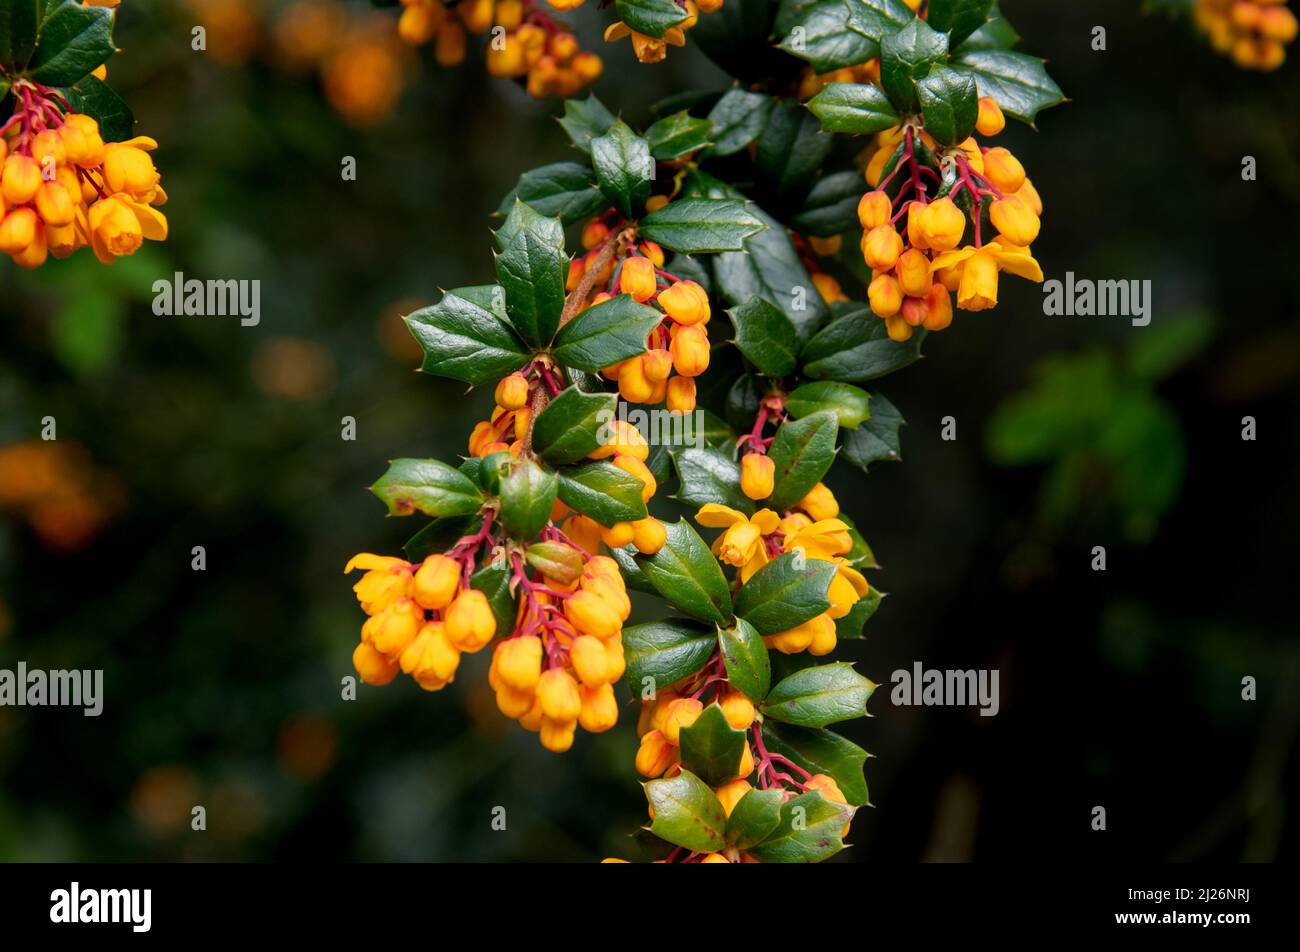 Berberis or barberry bush with orange flowers with green spiked leaves on a spring time Stock Photo